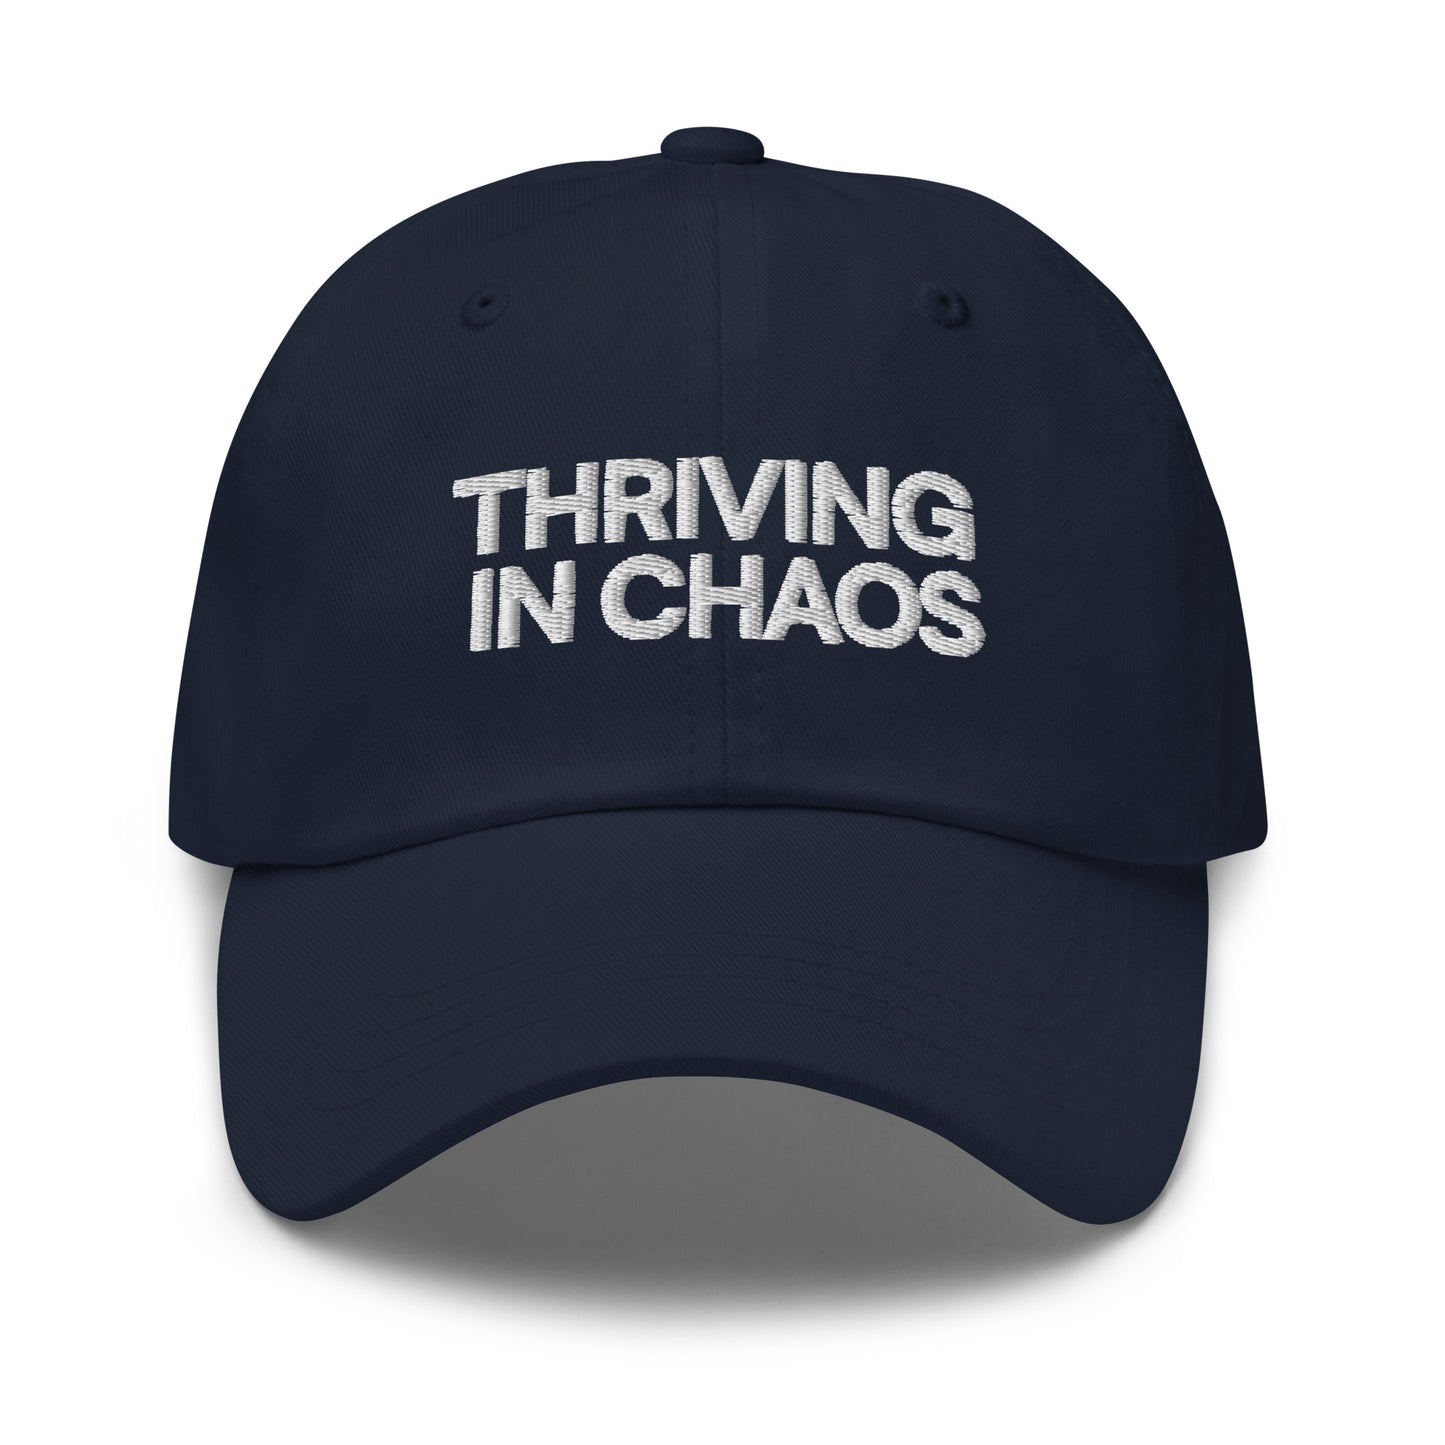 THRIVING IN CHAOS (NAVY BLUE HAT)